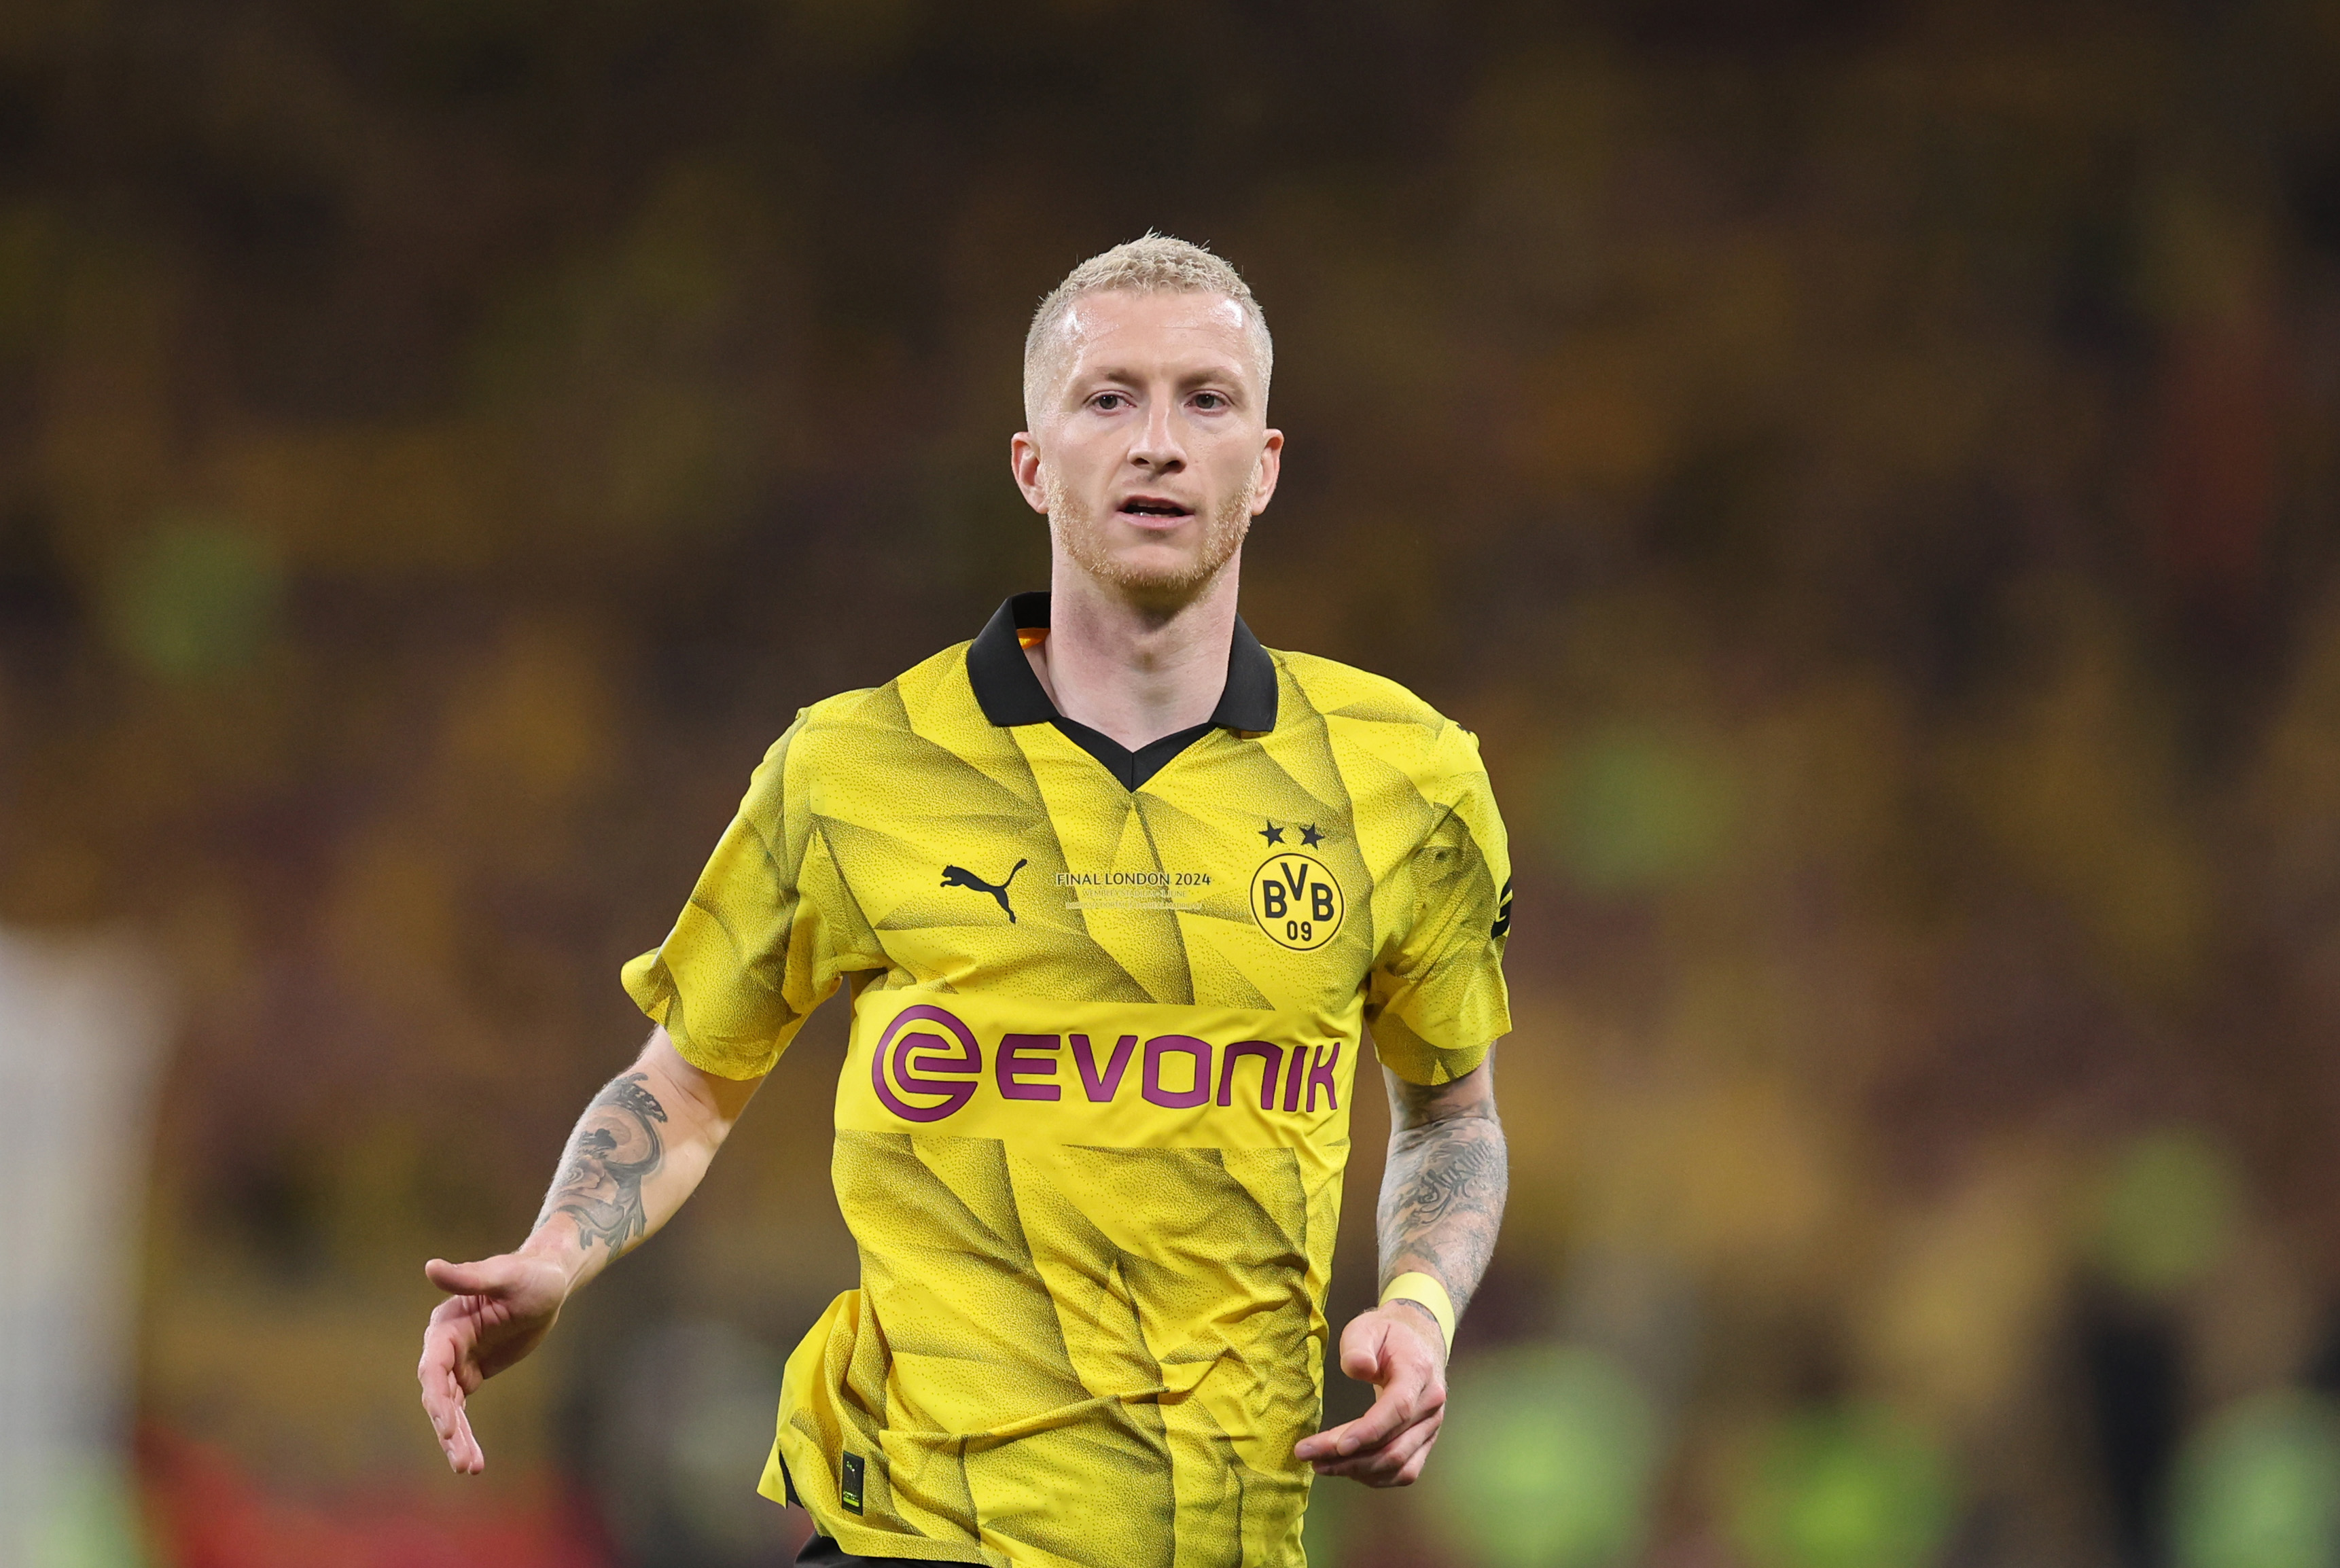 Dortmund legend Marco Reus could be headed to Los Angeles soon